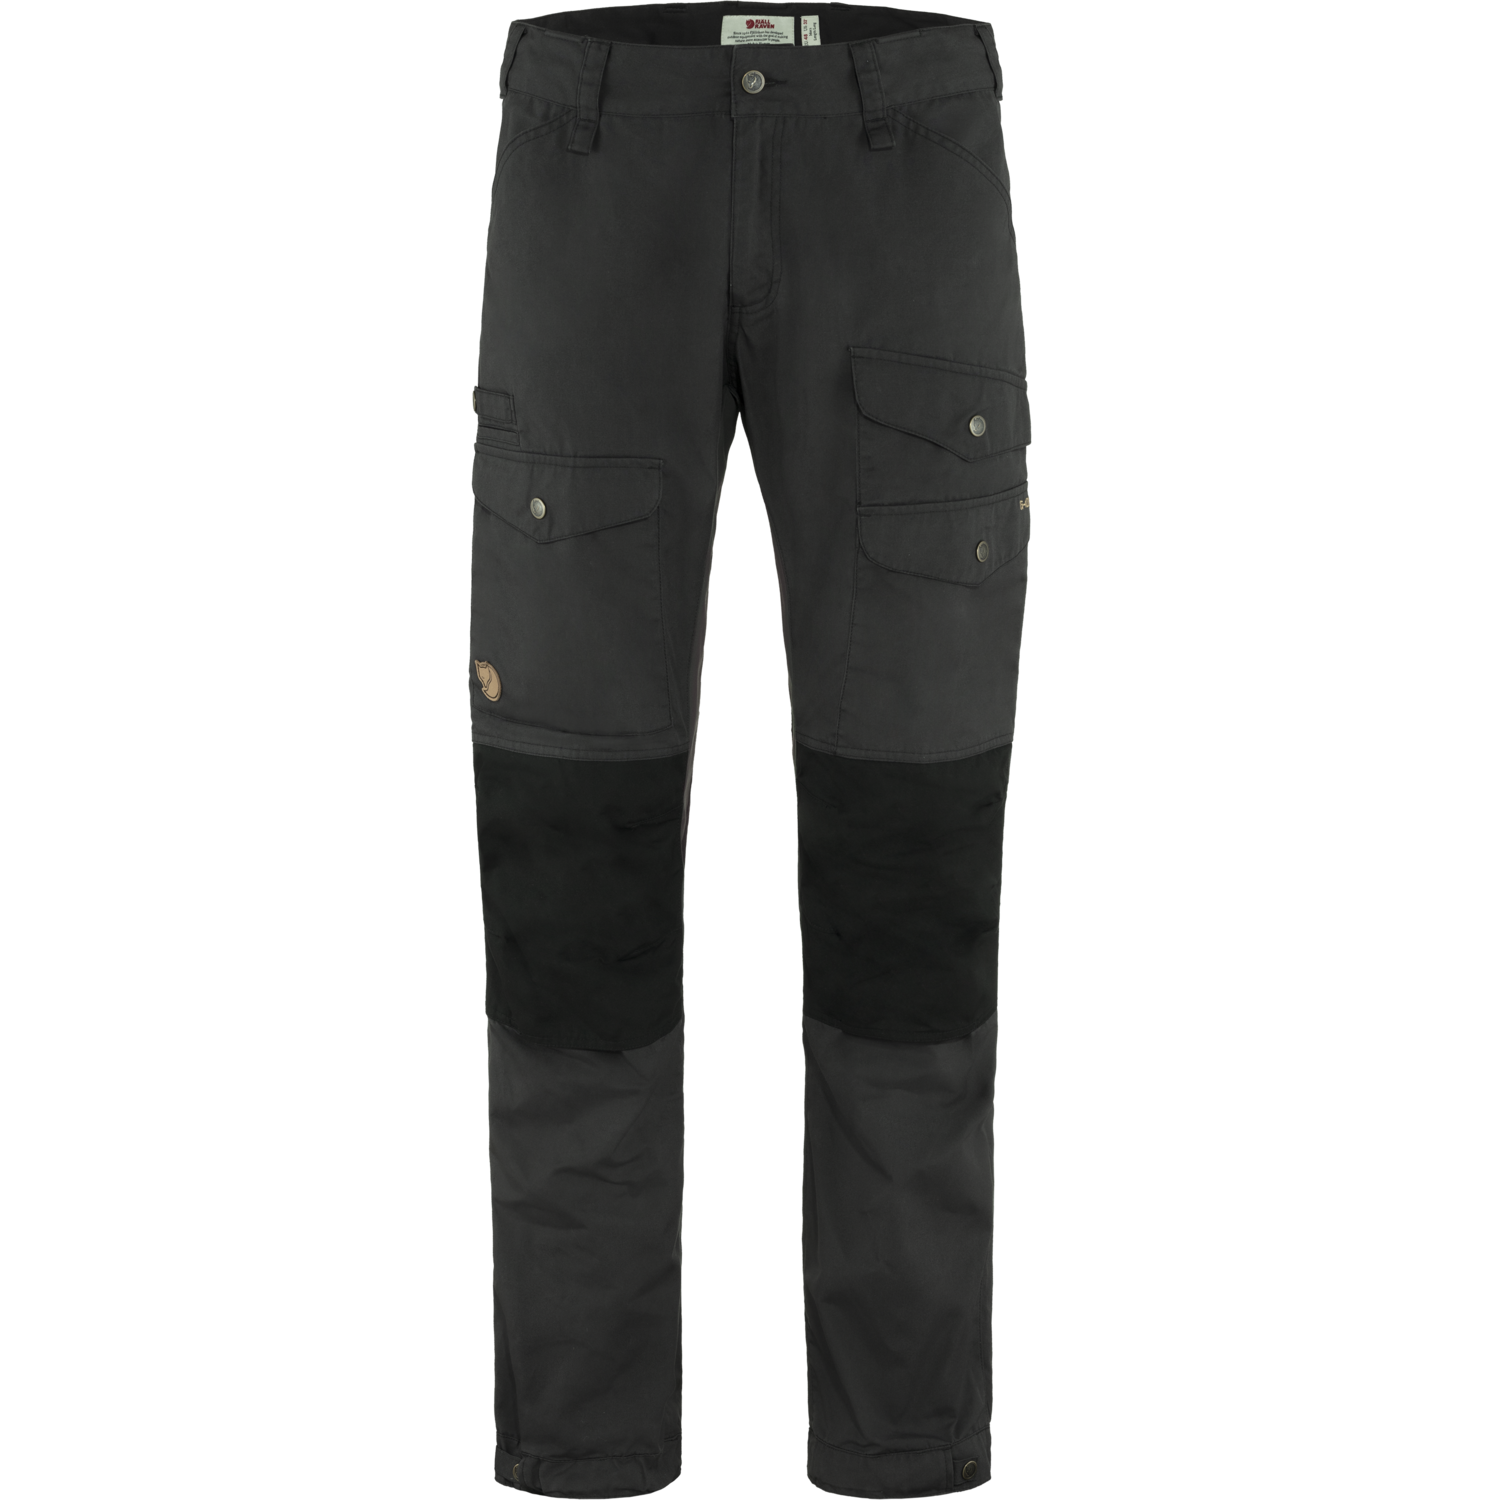 trekking trousers for winters